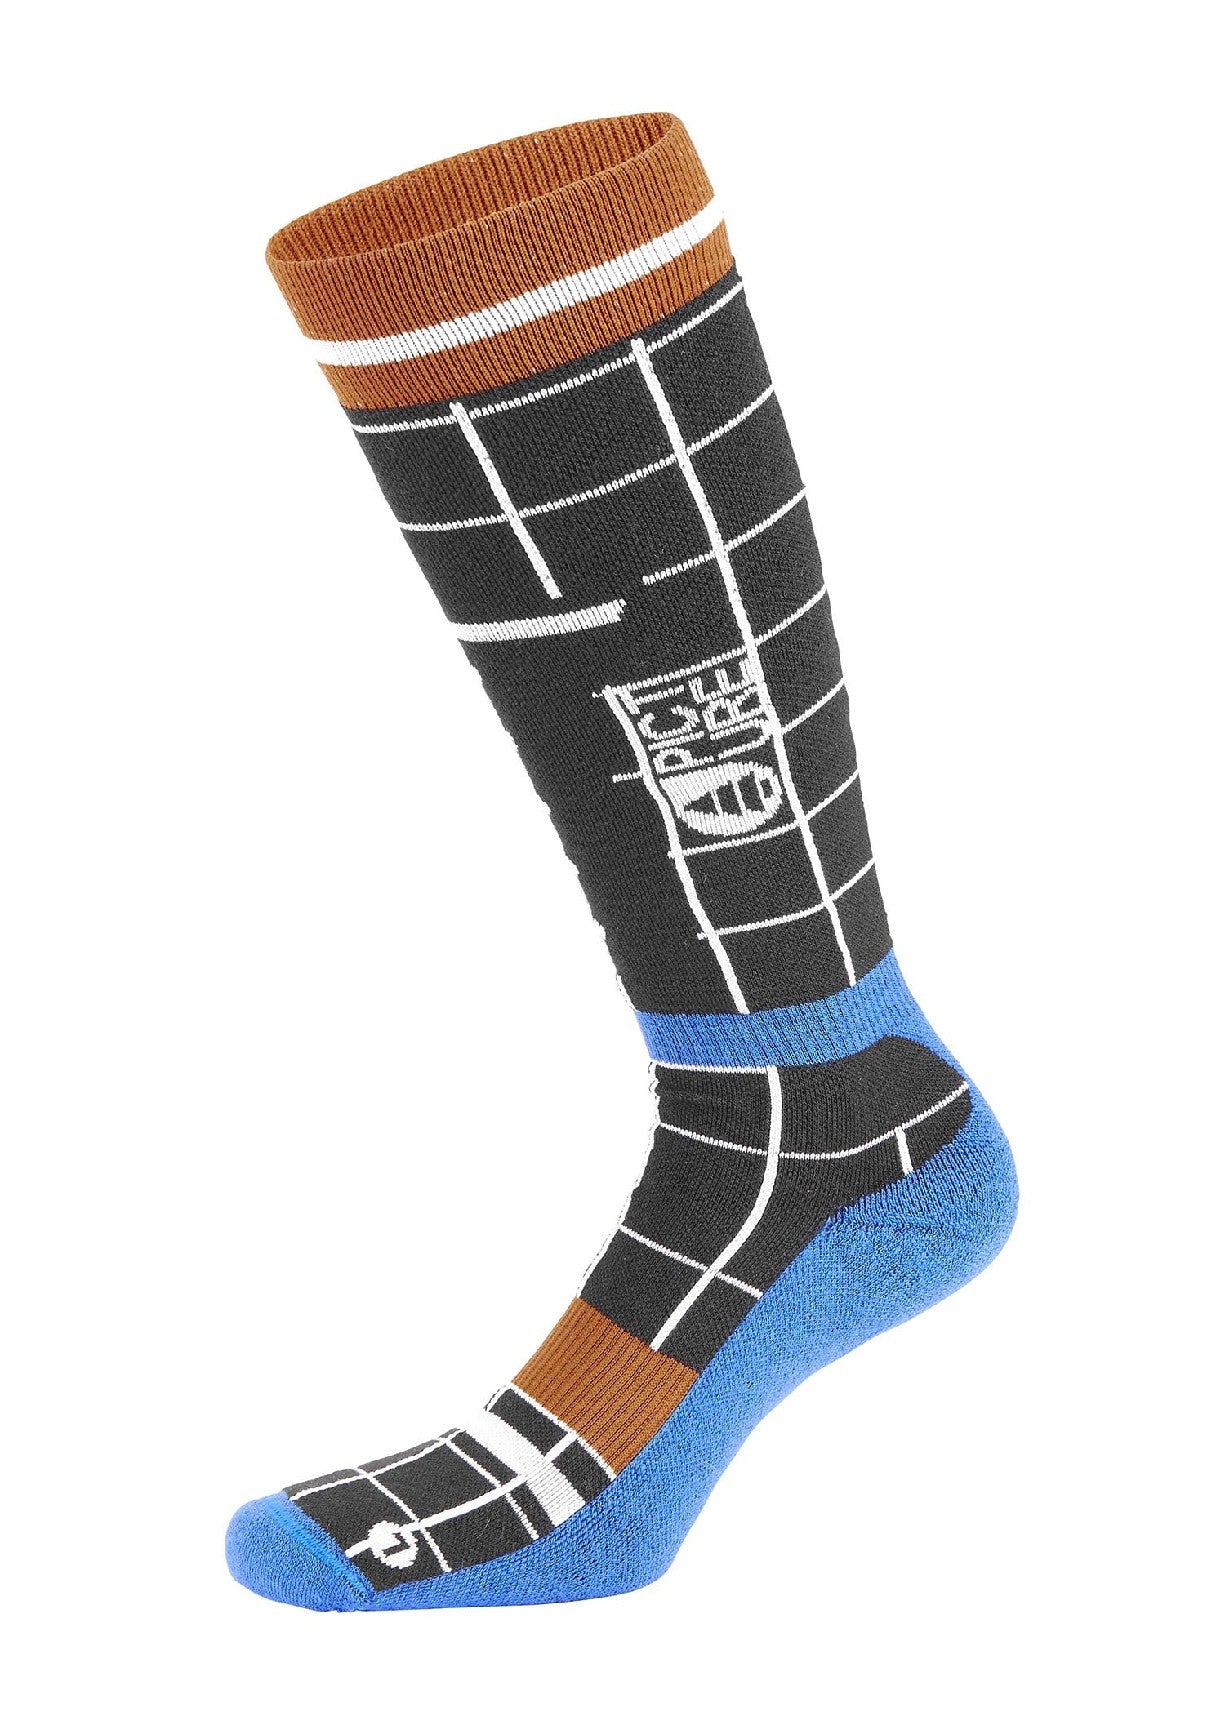 Chaussettes Socks HOWA OLYMPIC- Chaussettes design tous sport